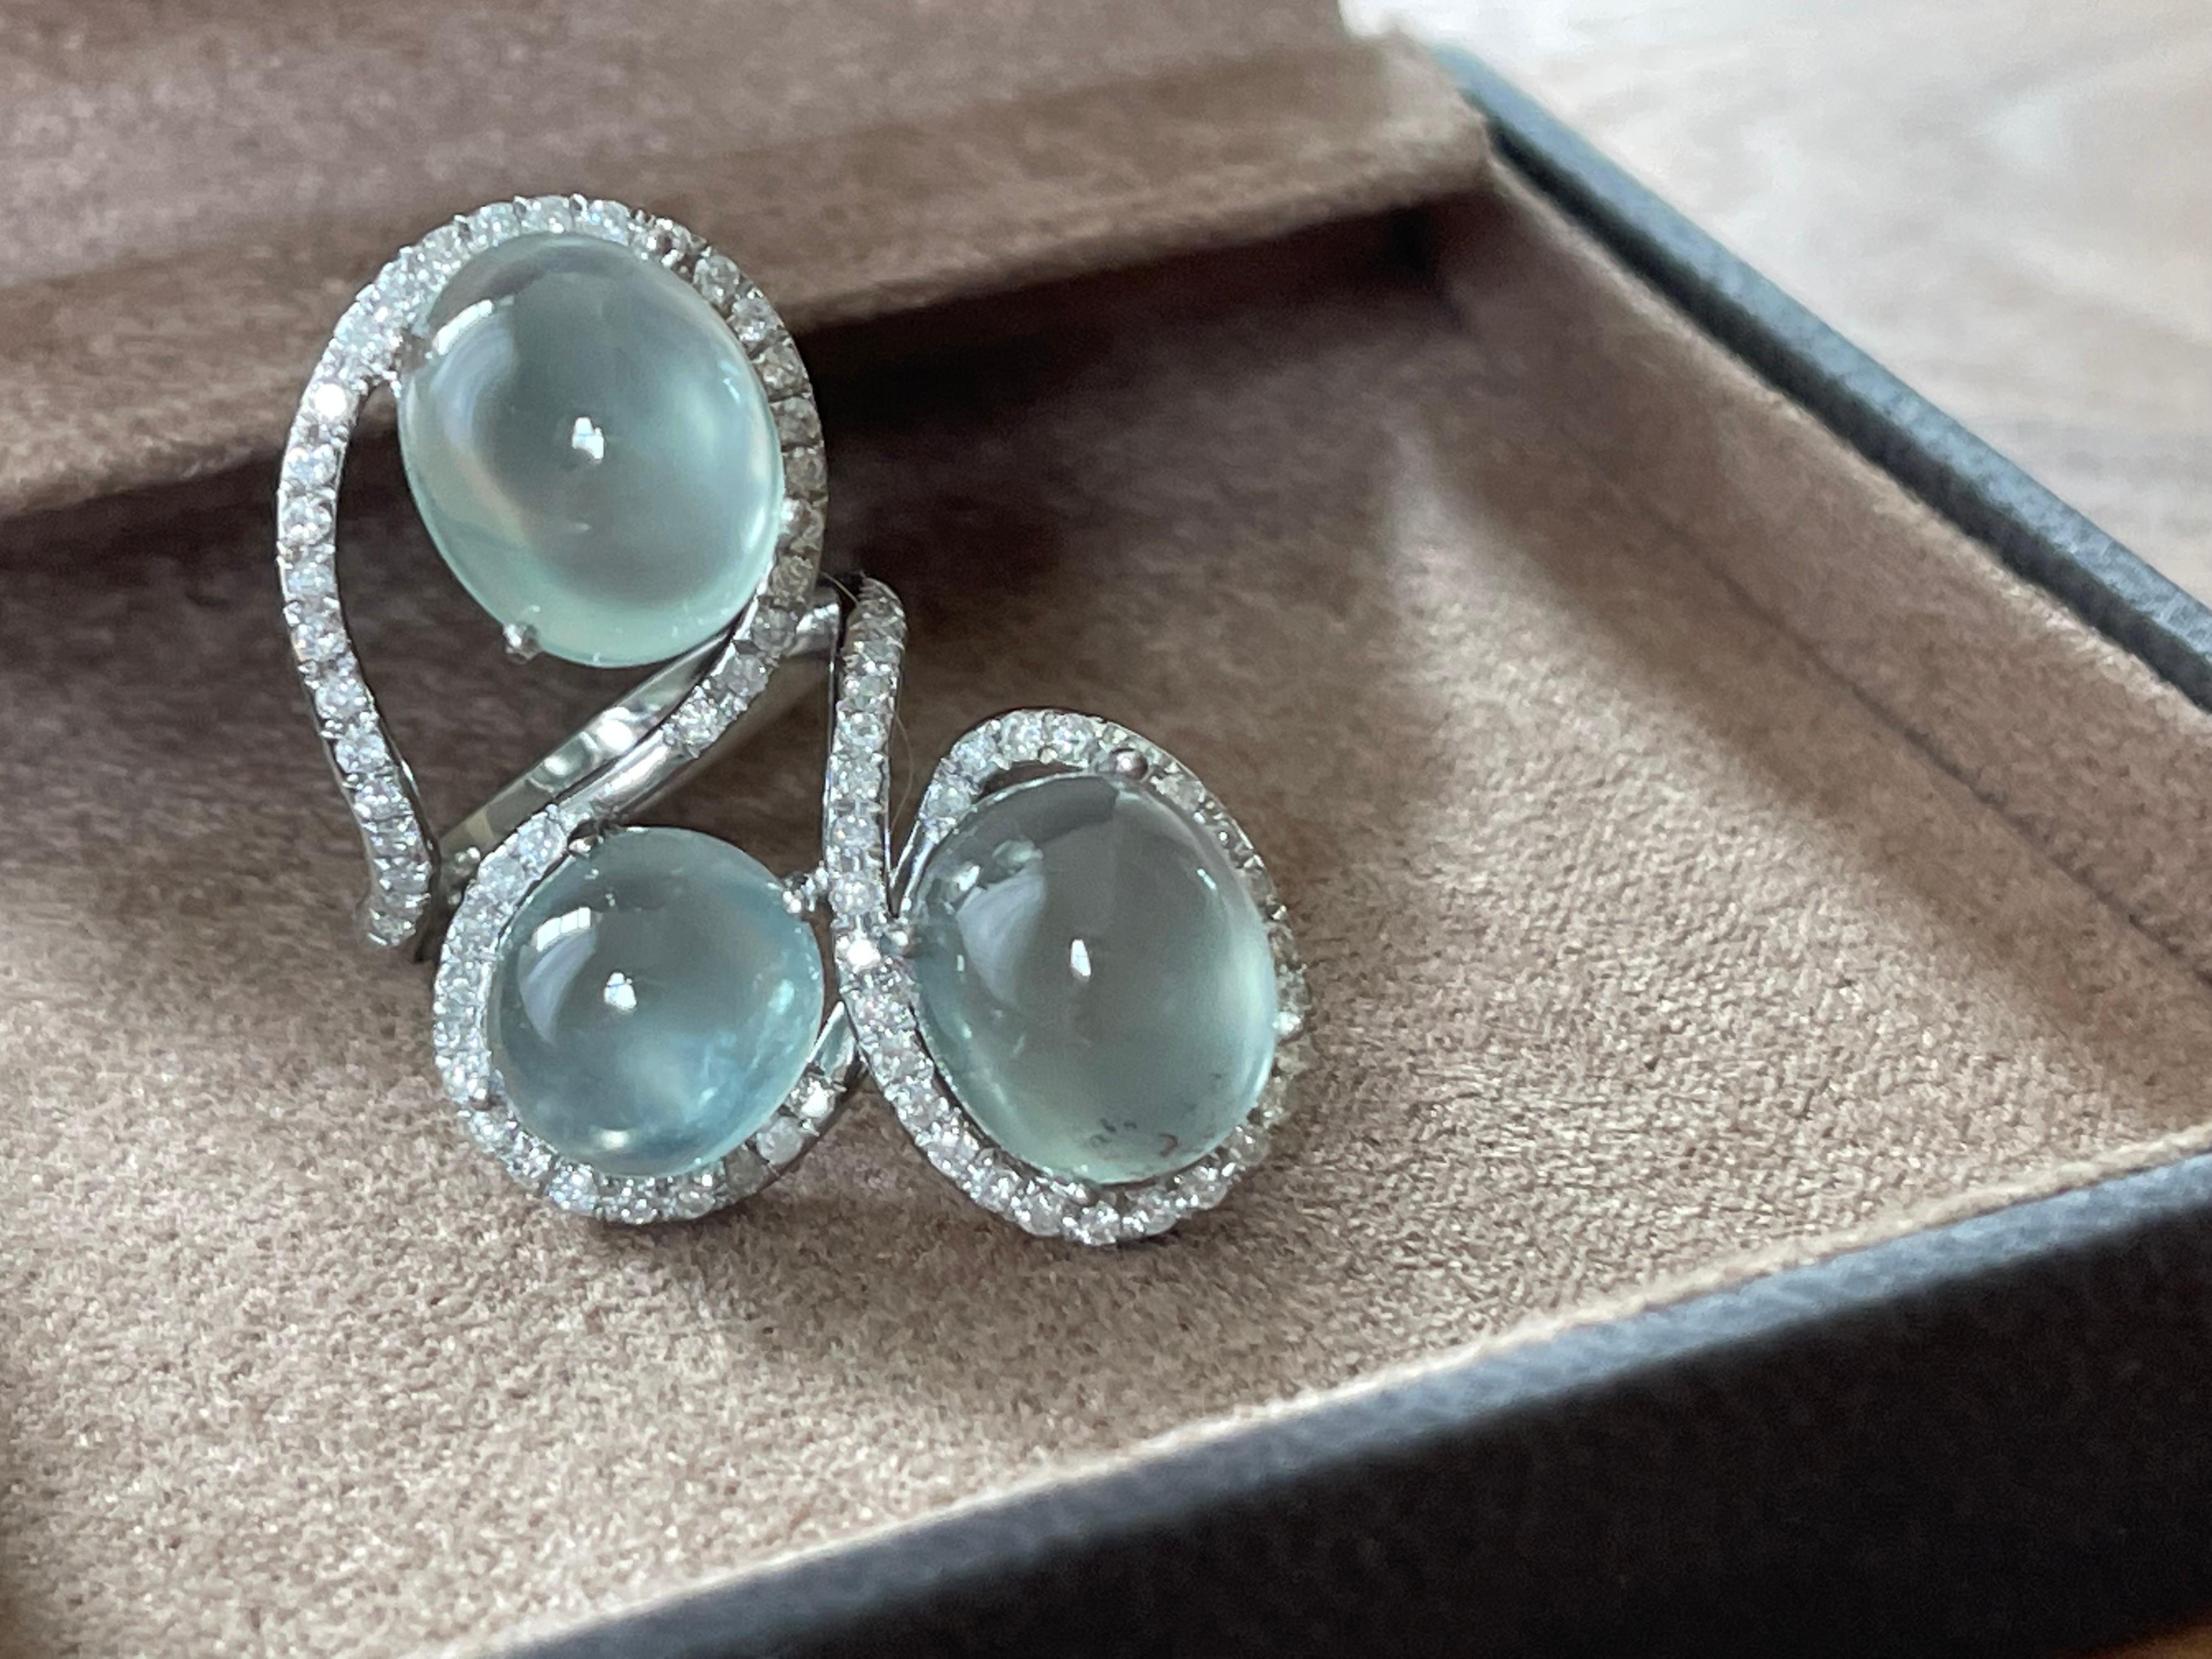 Fancy 18 K white Gold Ring featuring 3 Prehnite Cabochons weighing 22.18 ct and 75 brillinat cut Diamonds weighing 0.86 ct. 
The ring is currently size 15/55 ( american ring size 7 1/2) but can easily be resized. 
Masterfully handcrafted piece!